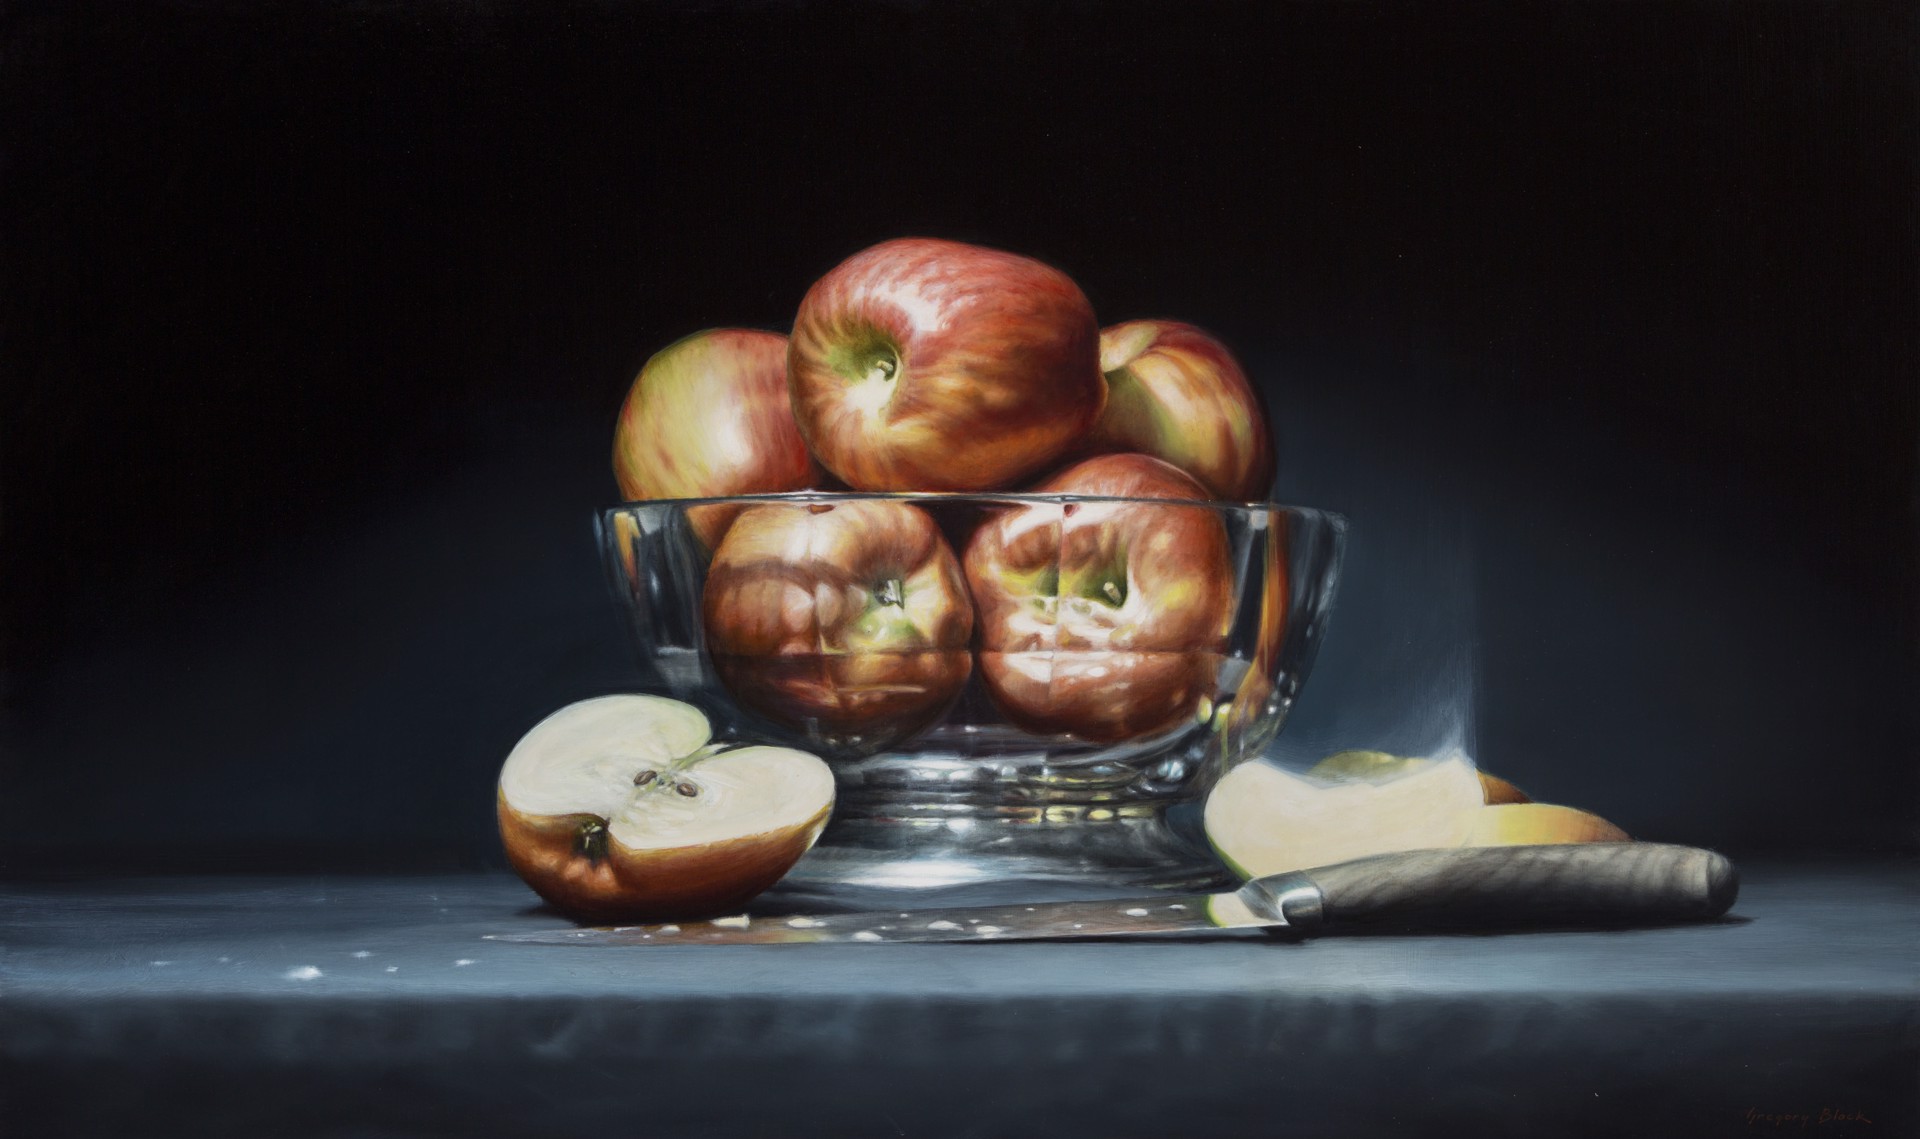 Apples by Gregory Block